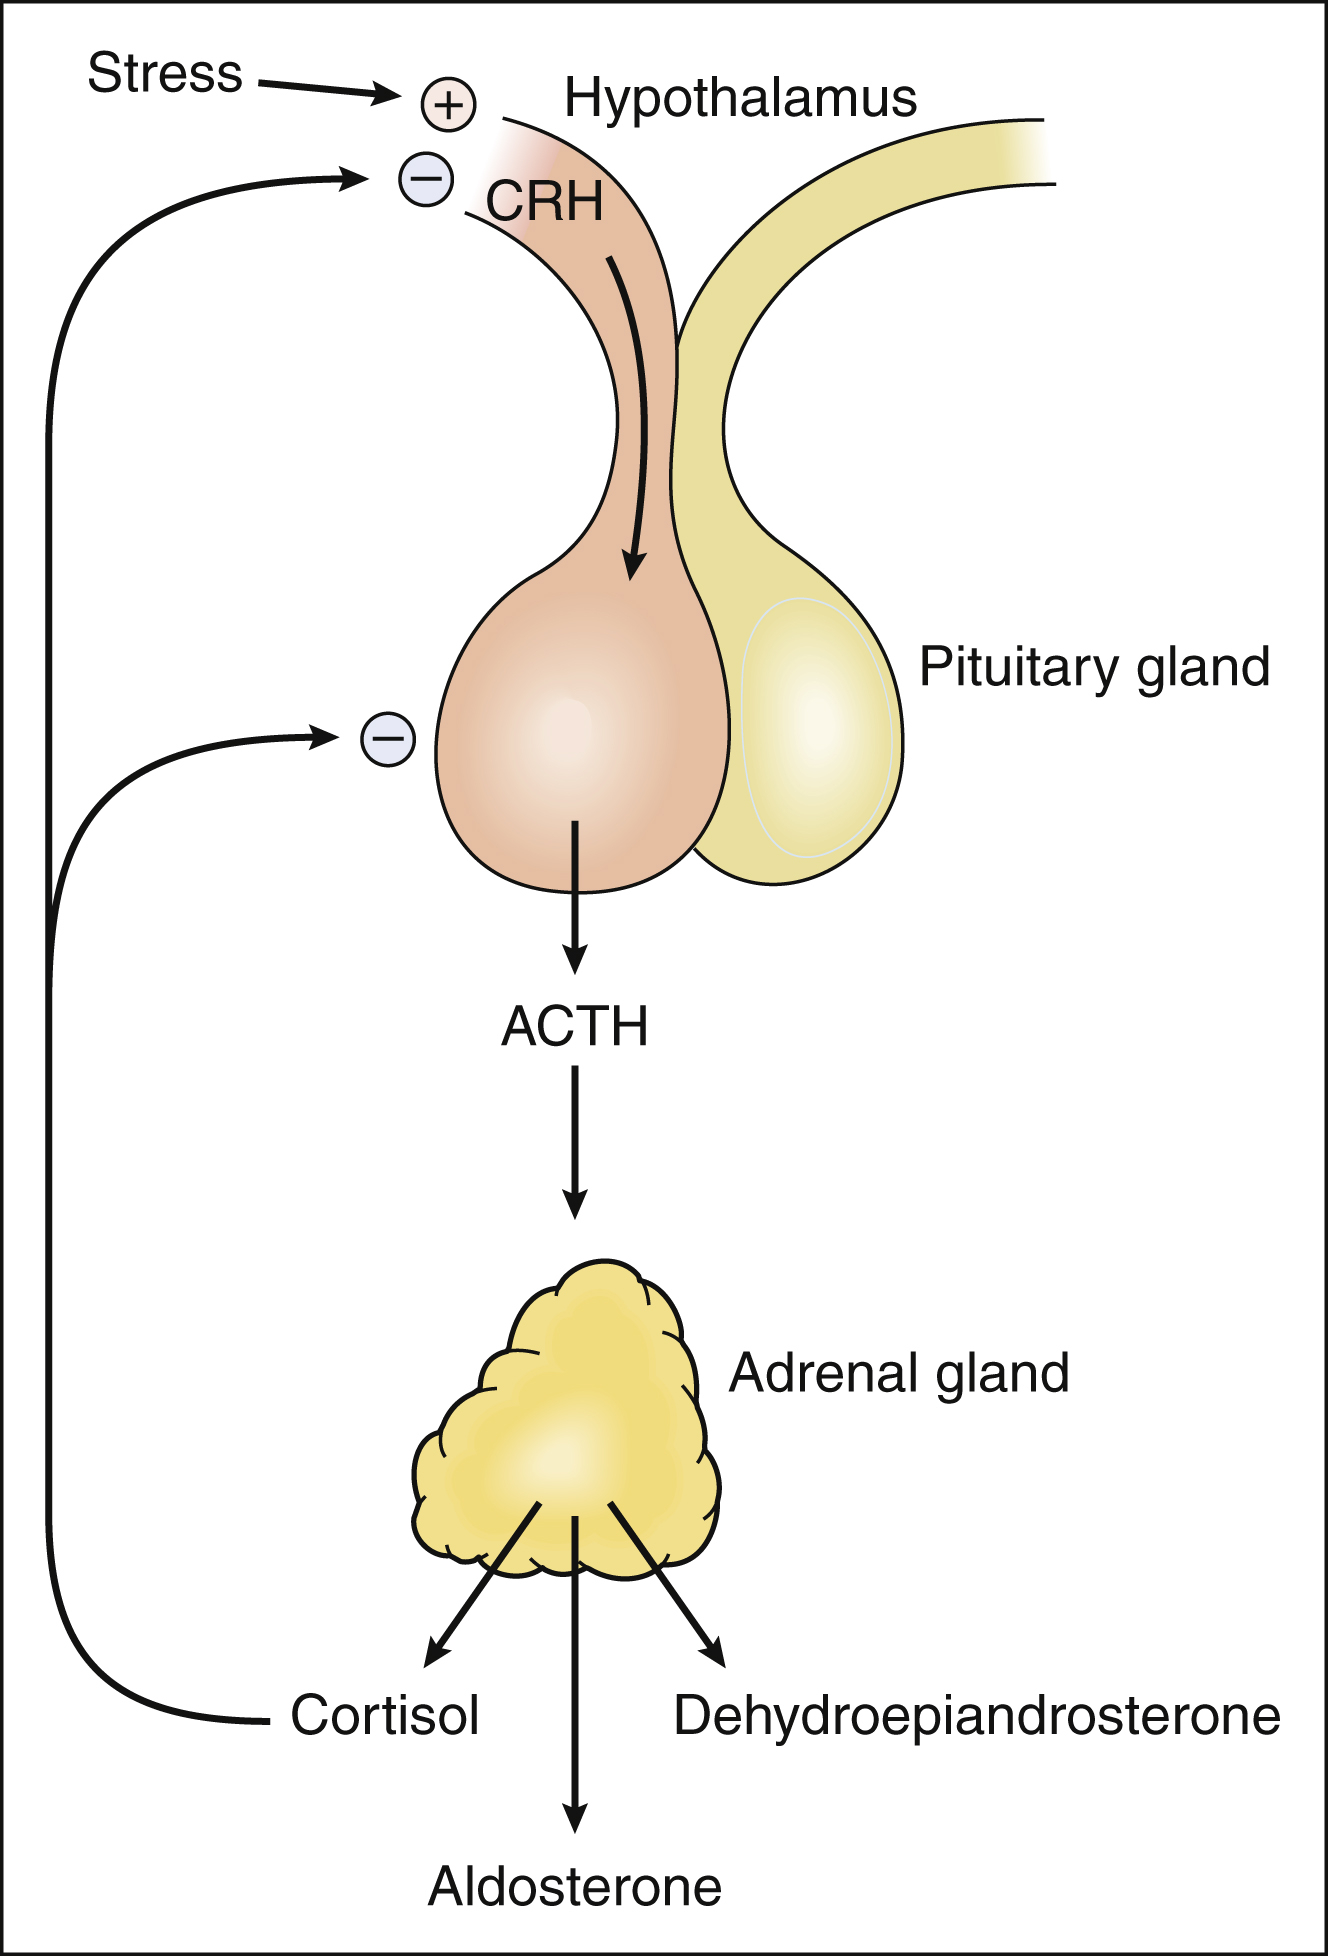 under stress the adrenal glands release the hormone